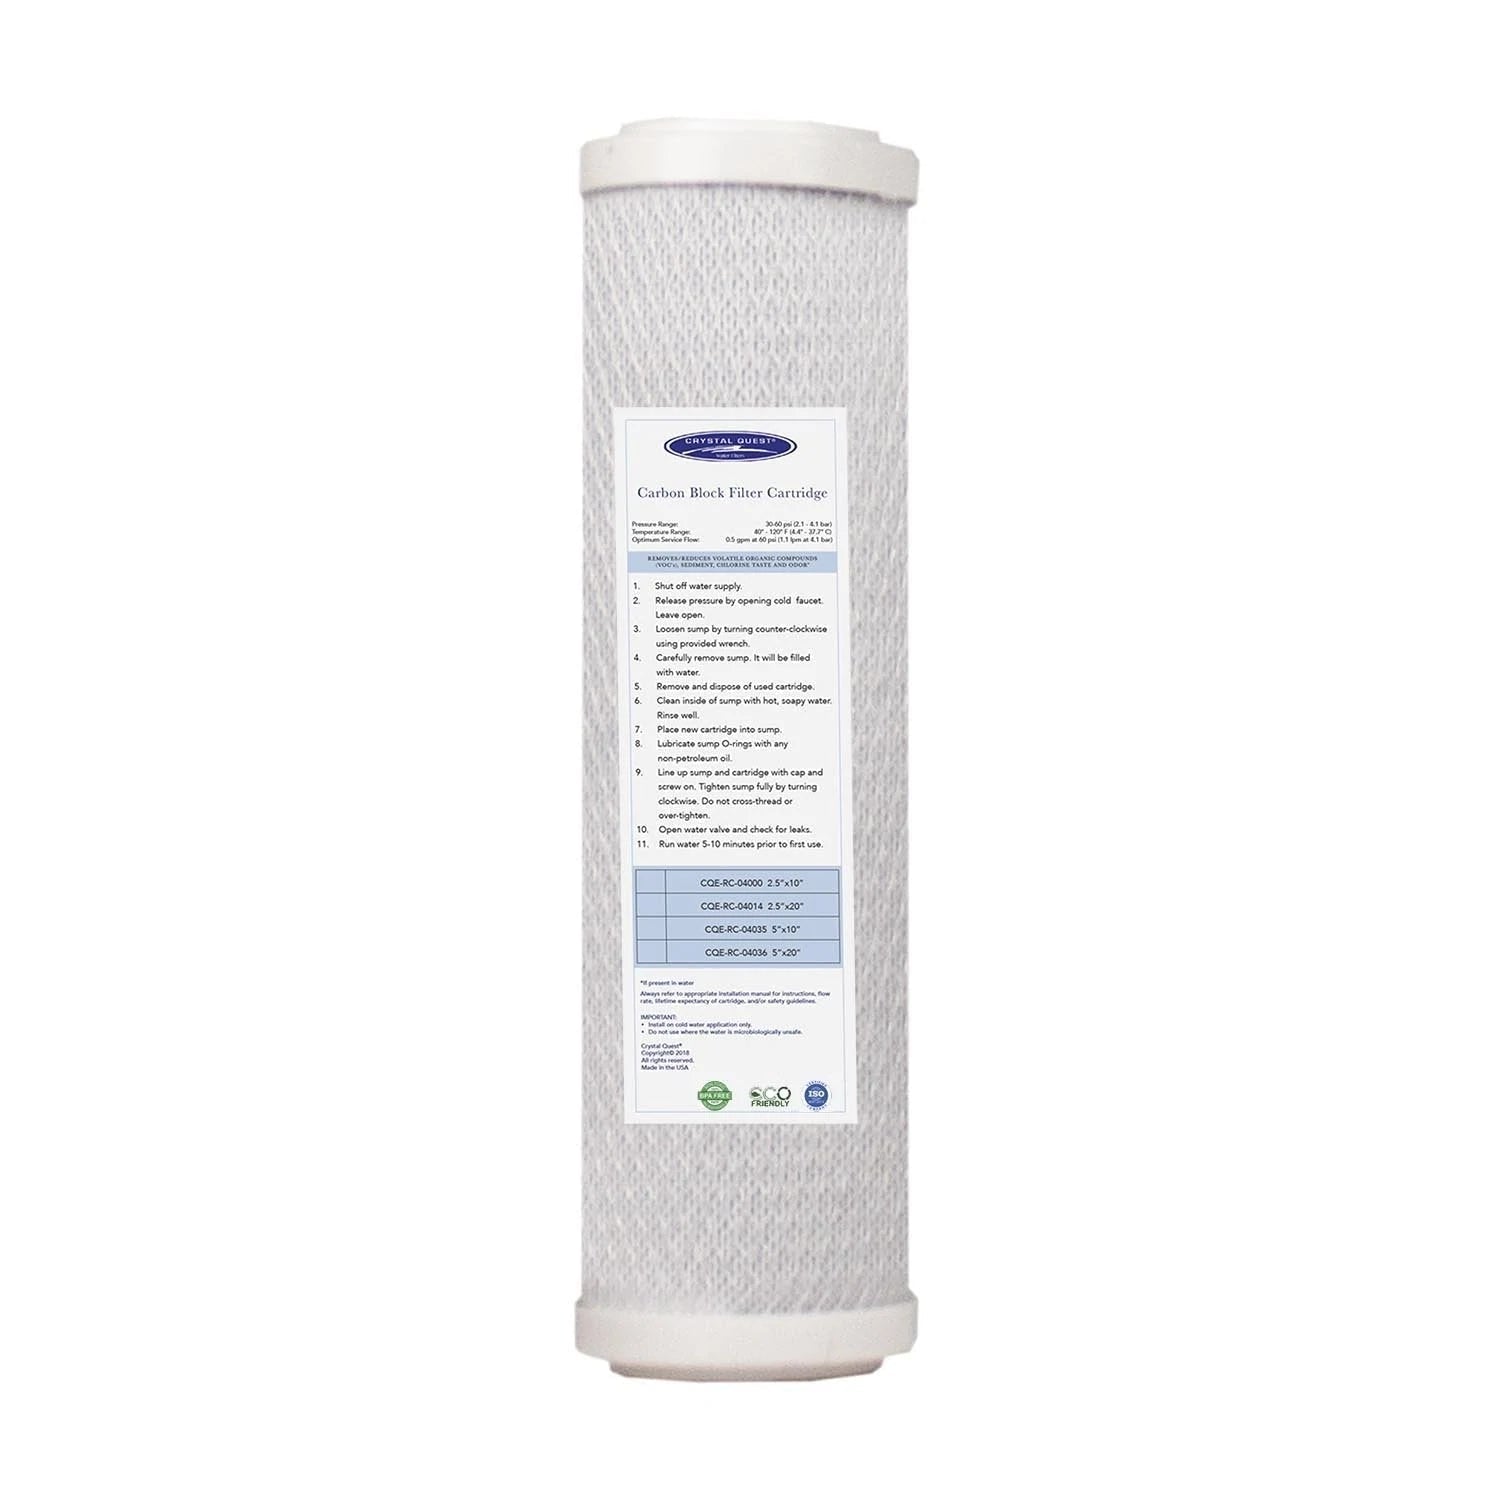 Crystal Quest Coconut Based 5 Micron Carbon Block Filter Cartridge 4-5/8" x 20"